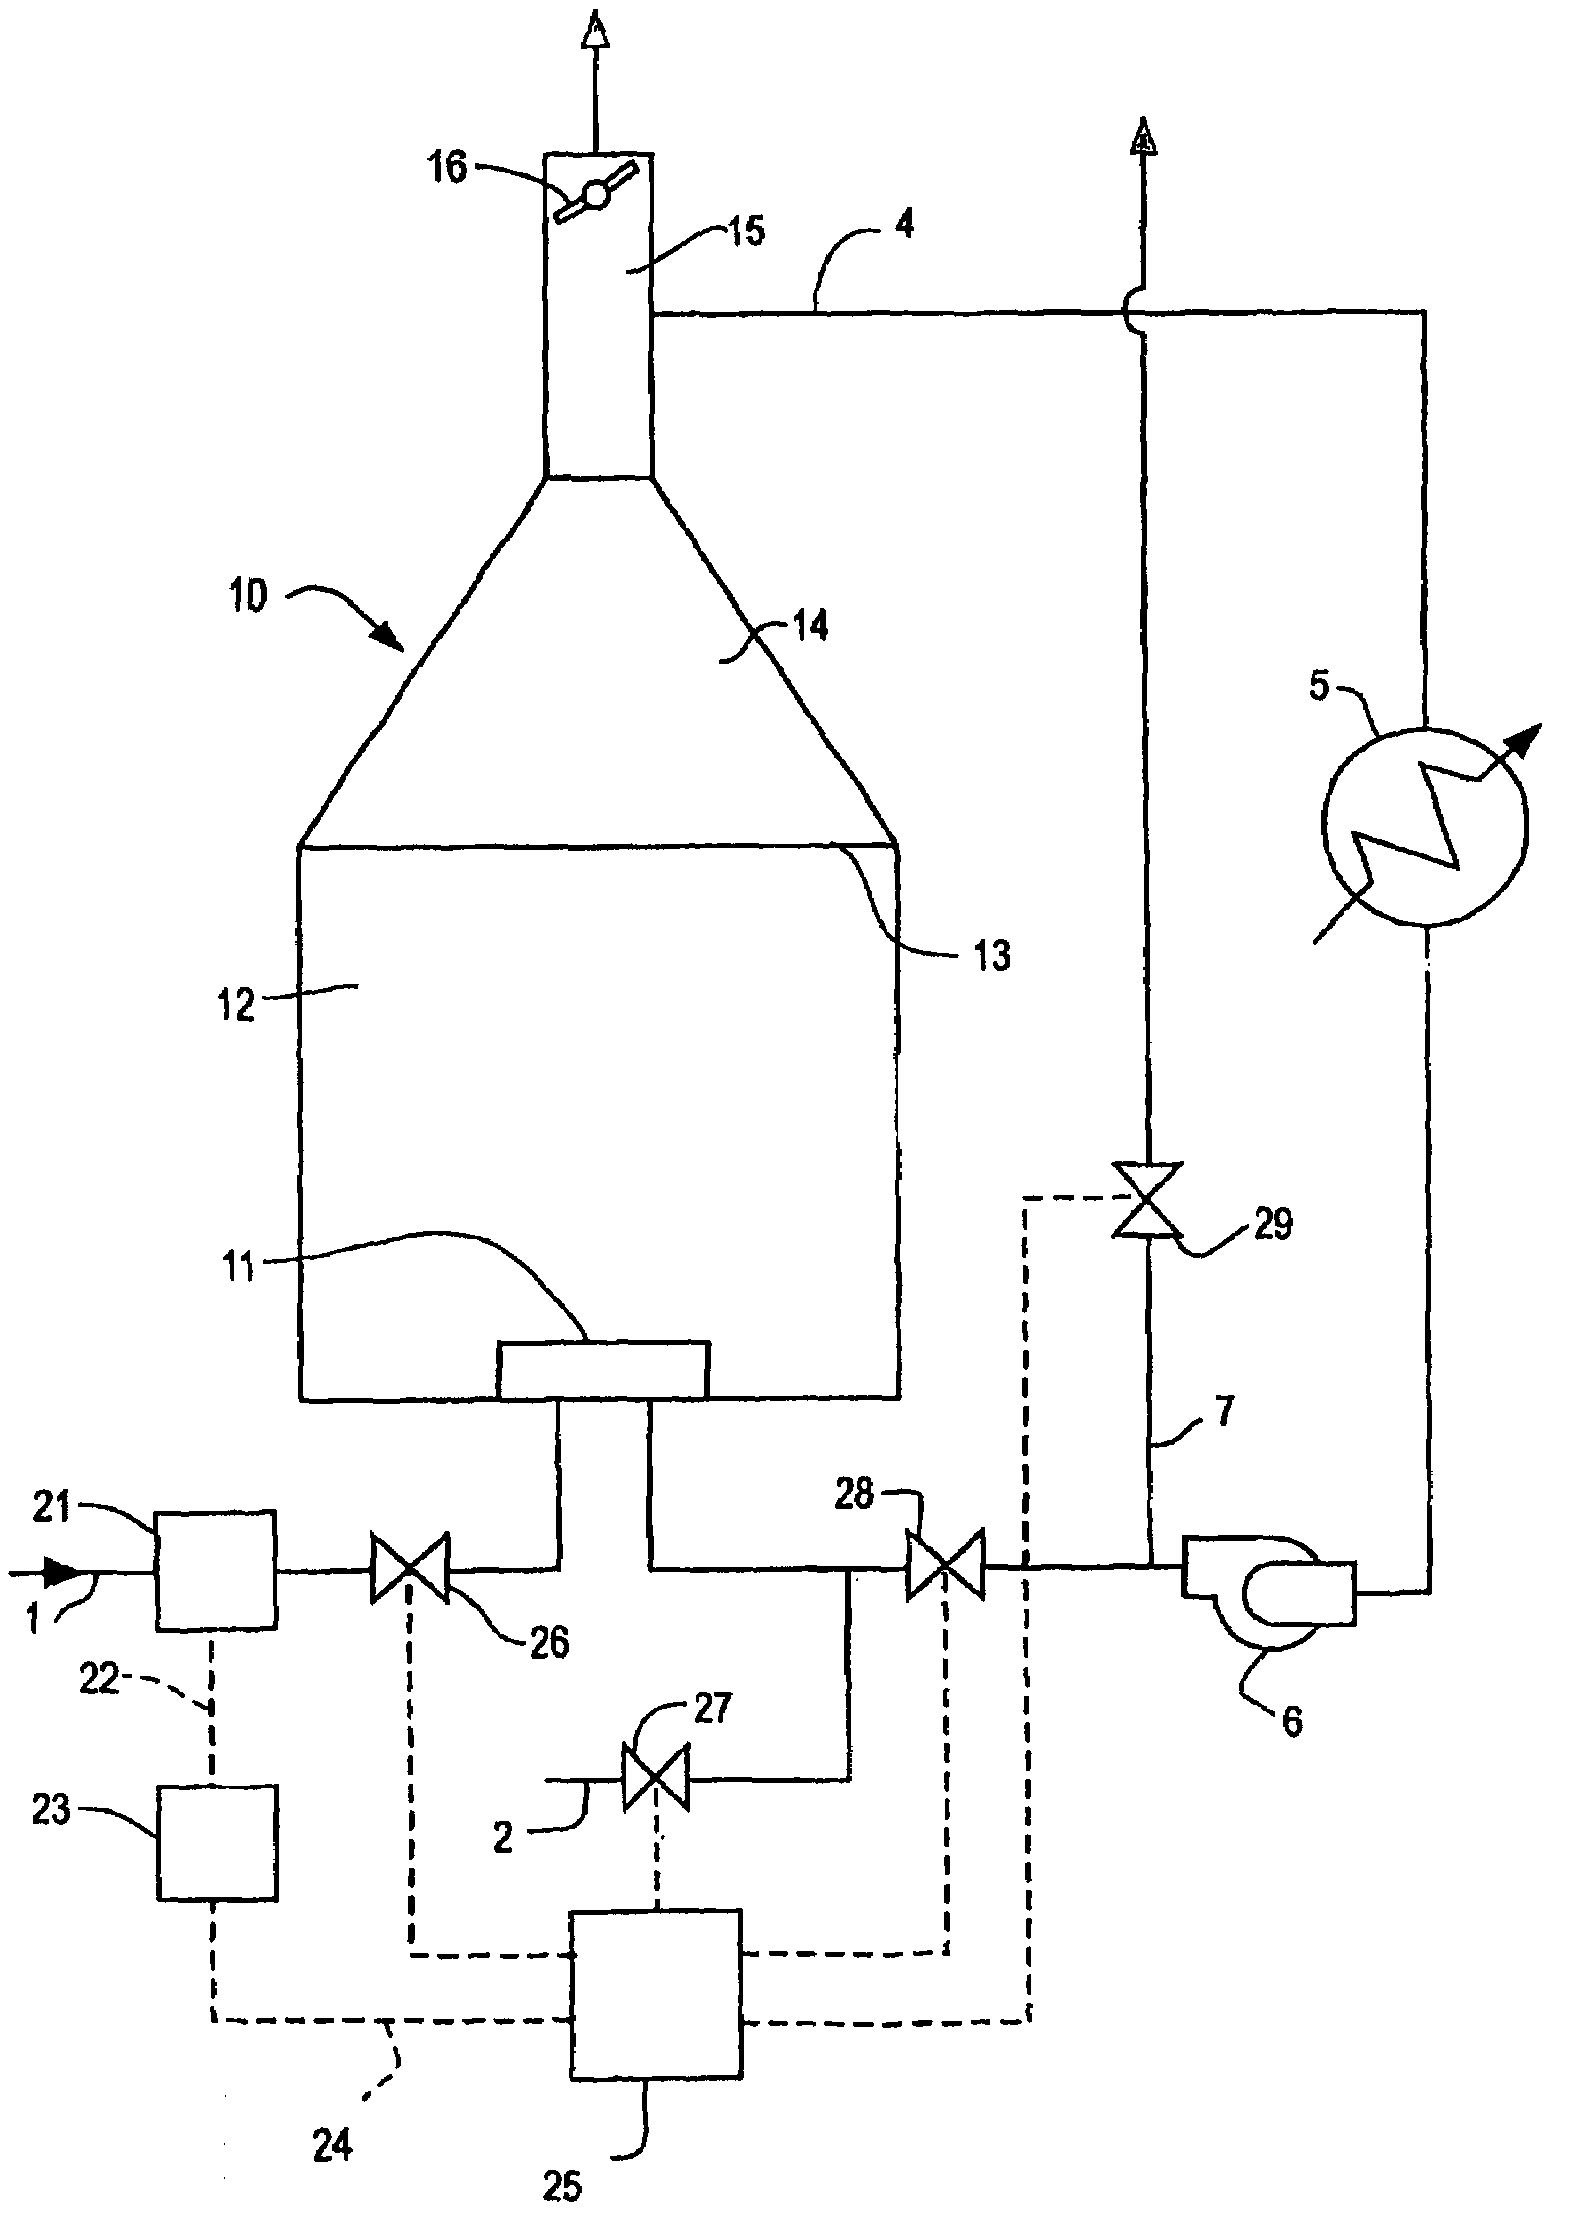 Method for combusting fuel in a fired heater